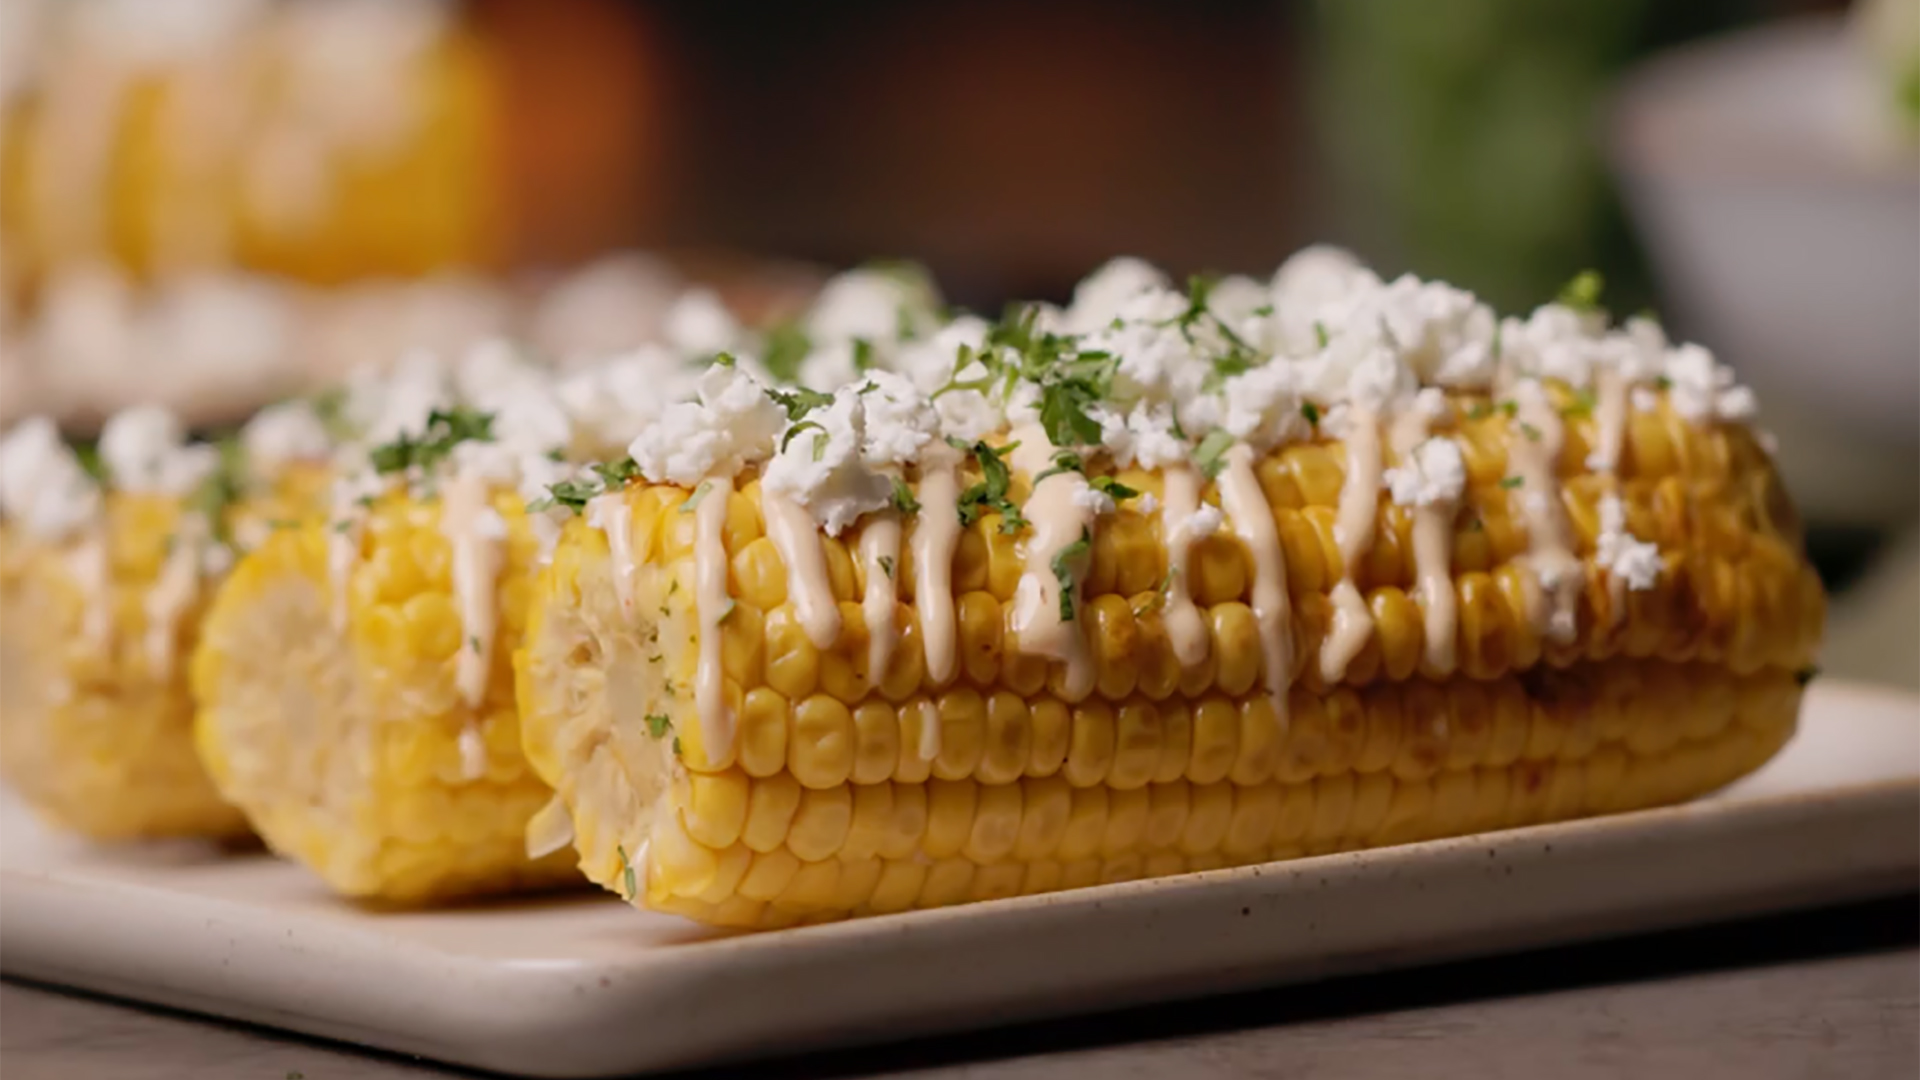 Grilled corn cobs with feta cheese and chipotle